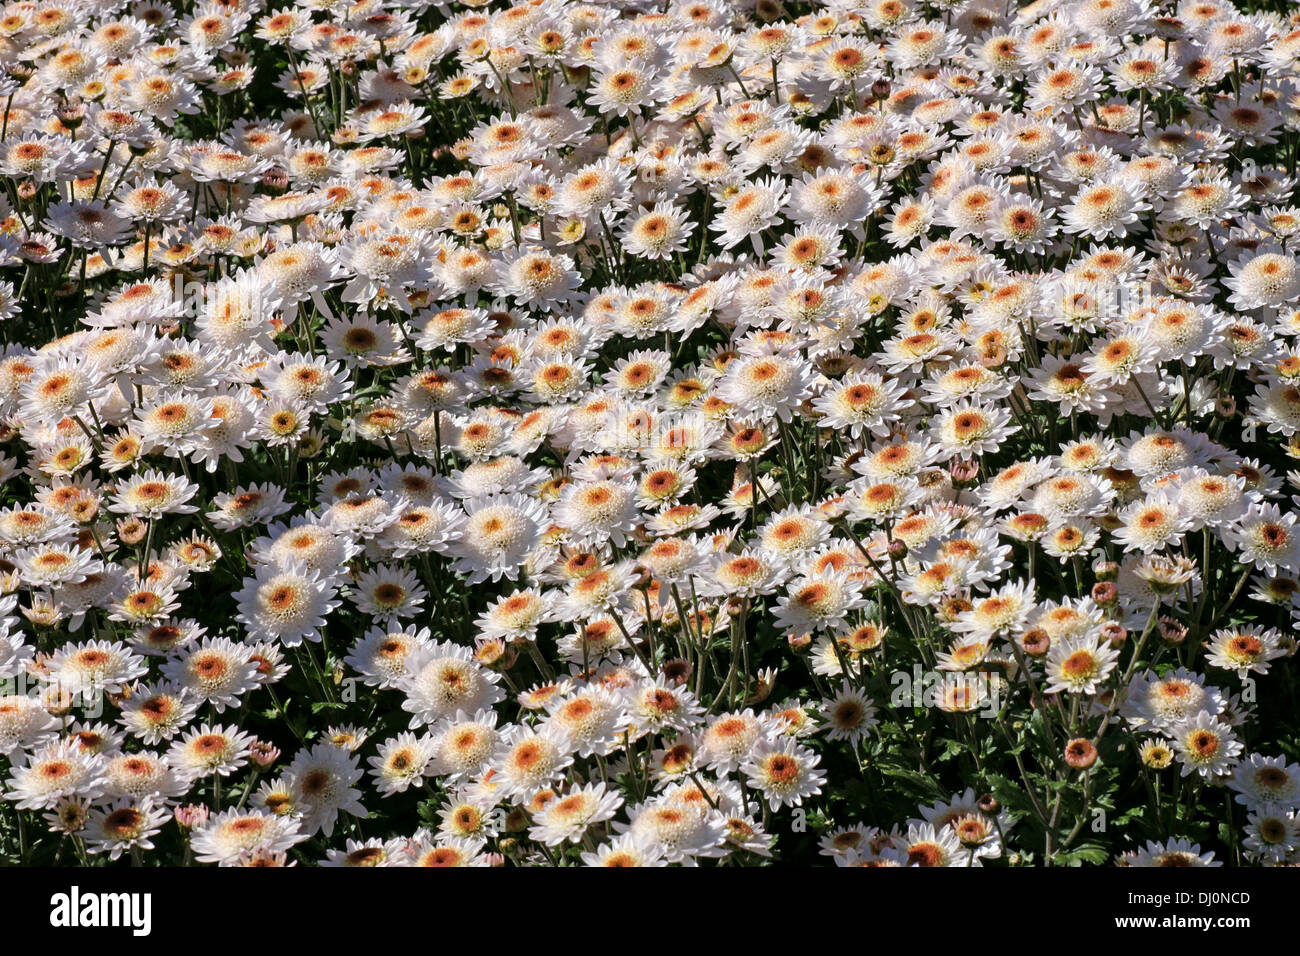 flowerbed with chrysanthemums at fall Stock Photo